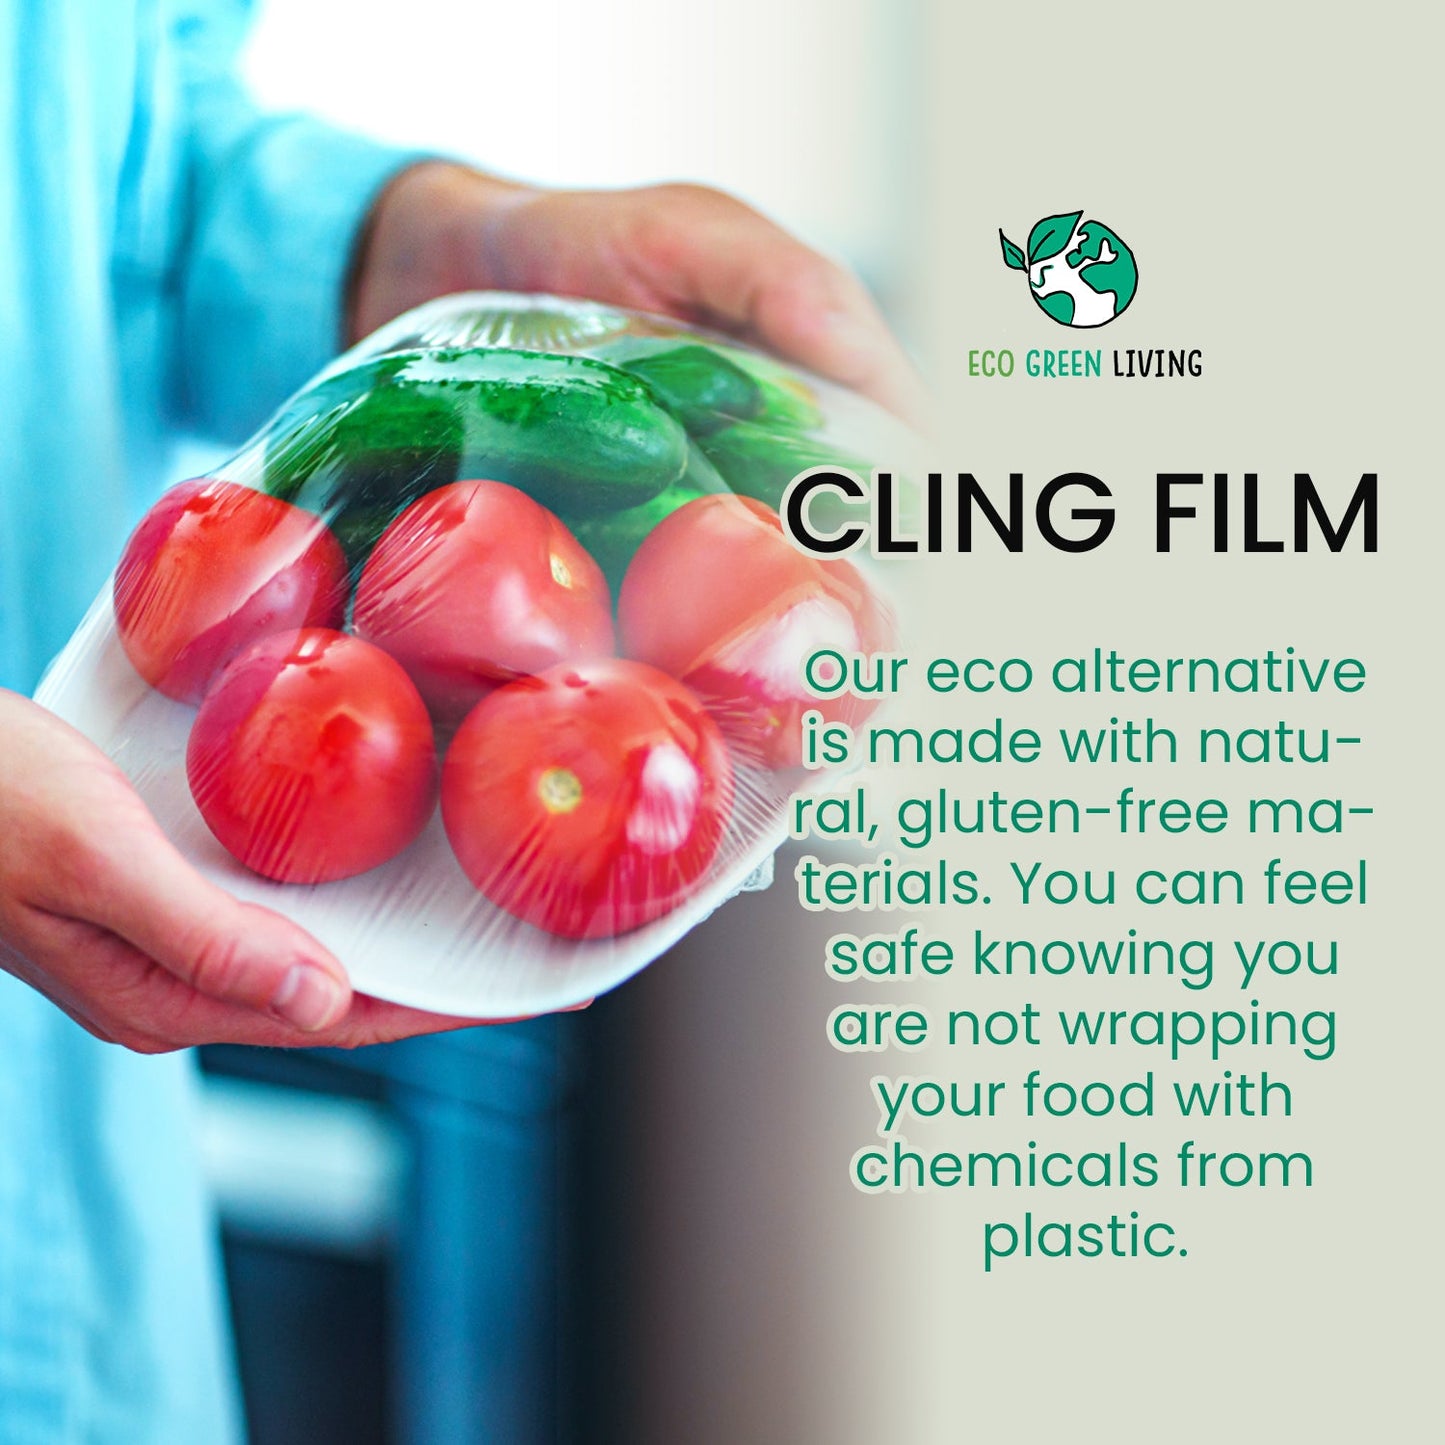 Compostable Cling Film Without The Plastic - Recycled Packaging - 1 roll 30cm x 30m - Eco Green Living